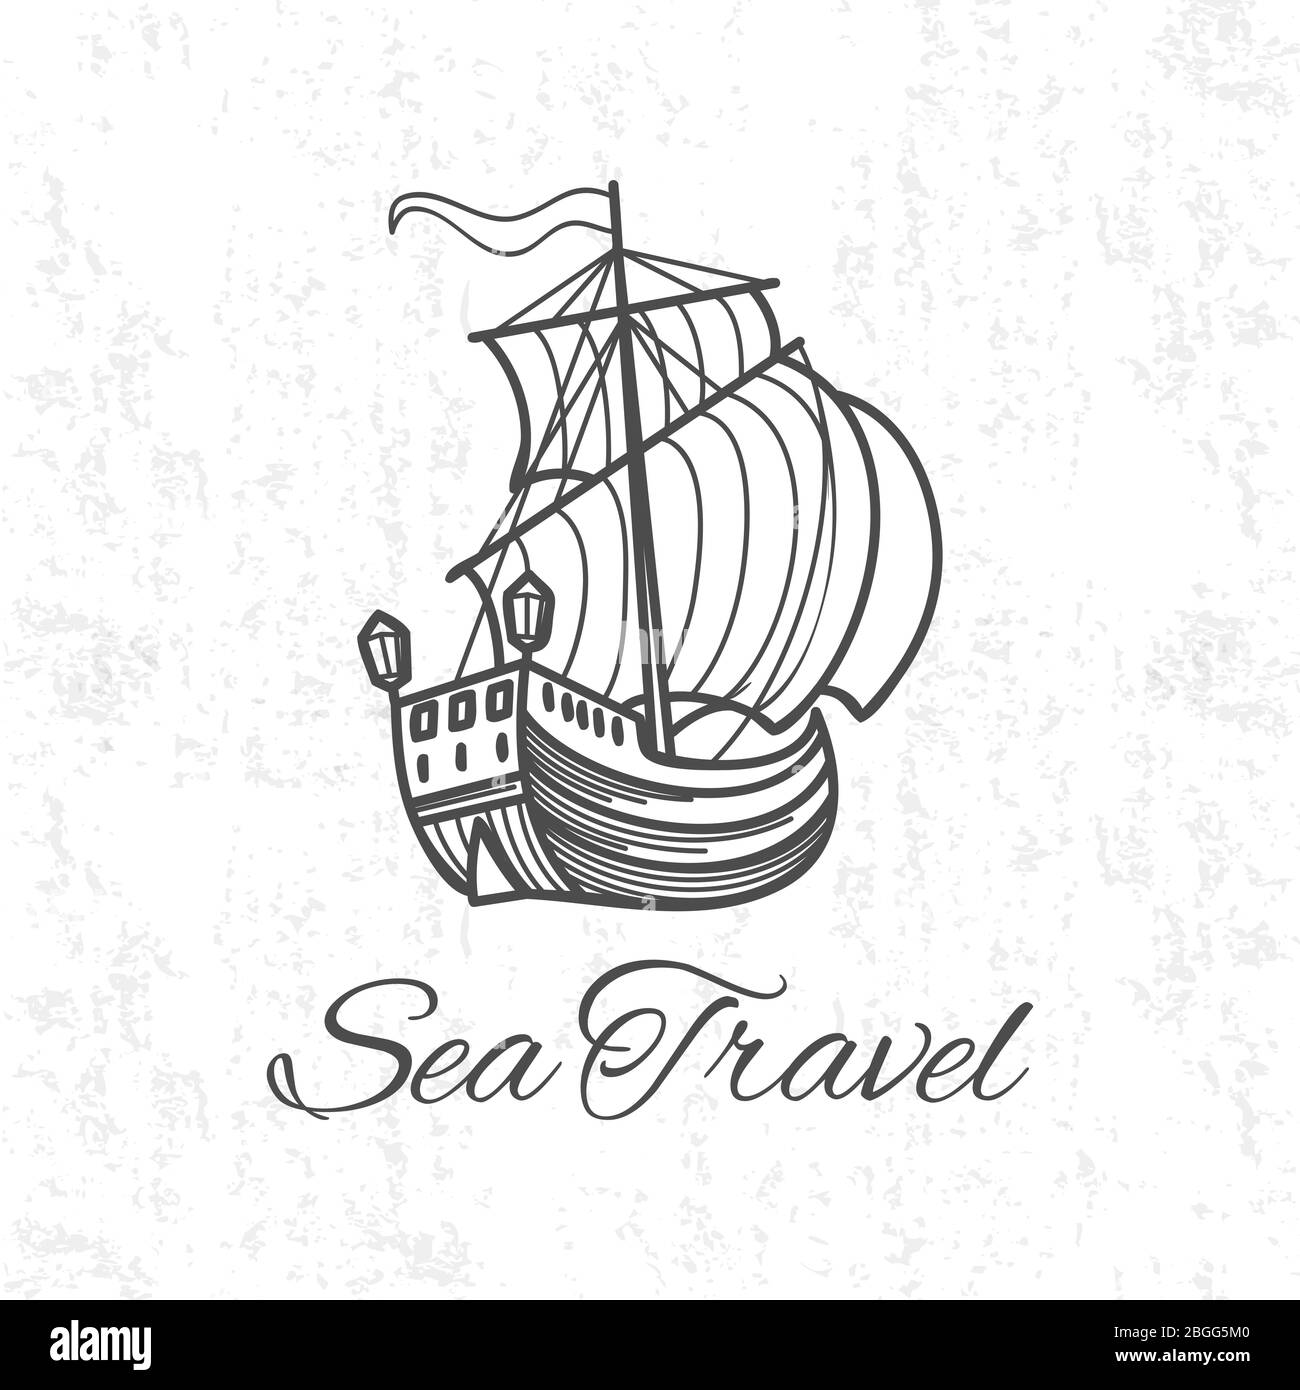 Antique travel ship on grunge background. Sea travel banner design. Vector ship antique with sail, sailboat adventure illustration Stock Vector